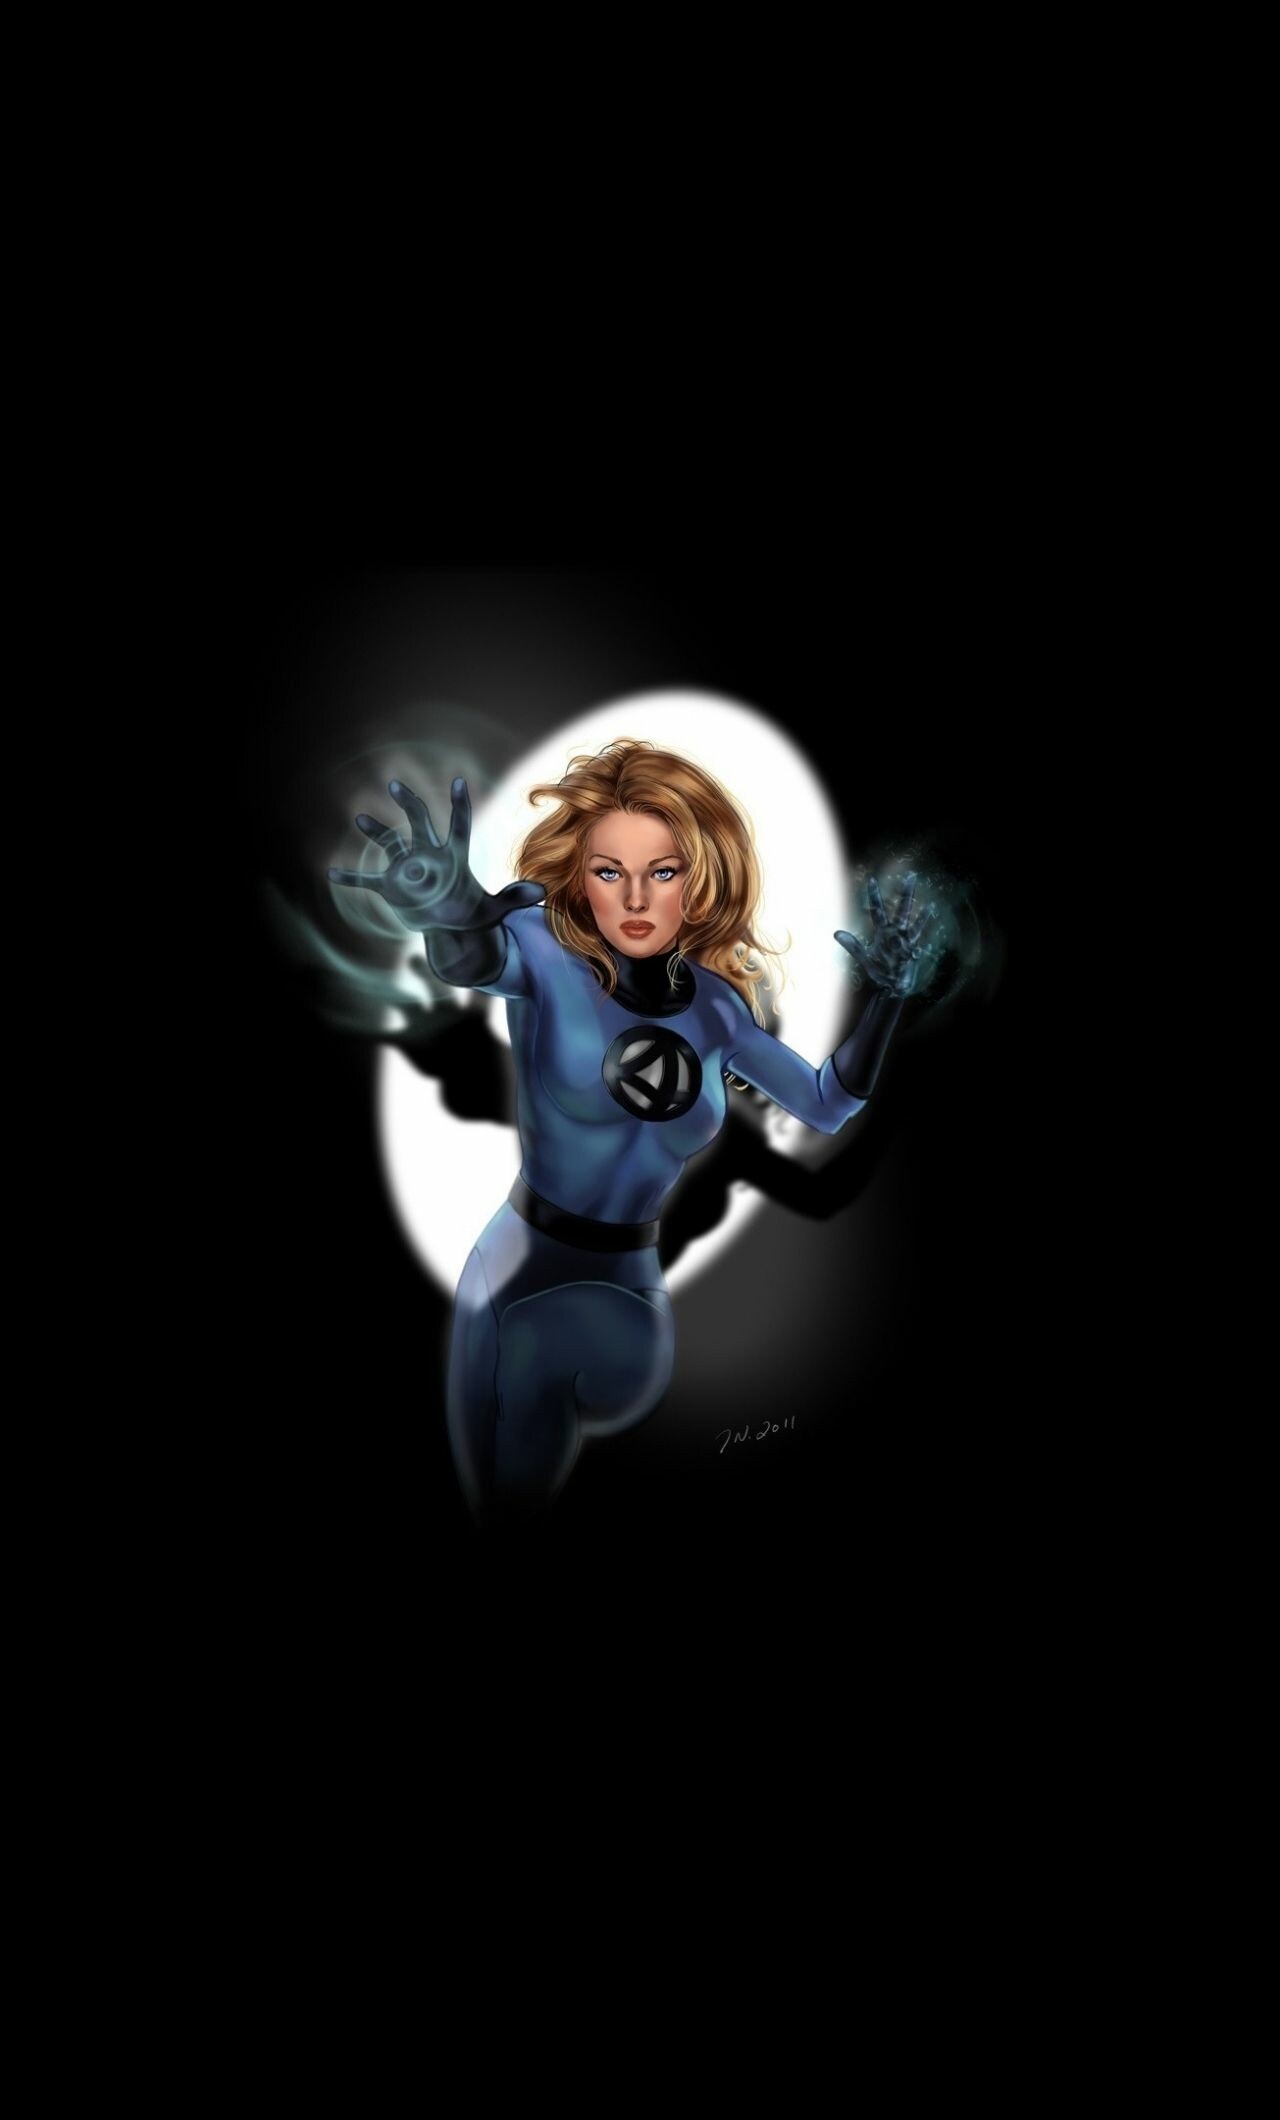 Fantastic 4: Sue Storm, Received her powers by being exposed to a cosmic storm, Minimalistic. 1280x2120 HD Background.